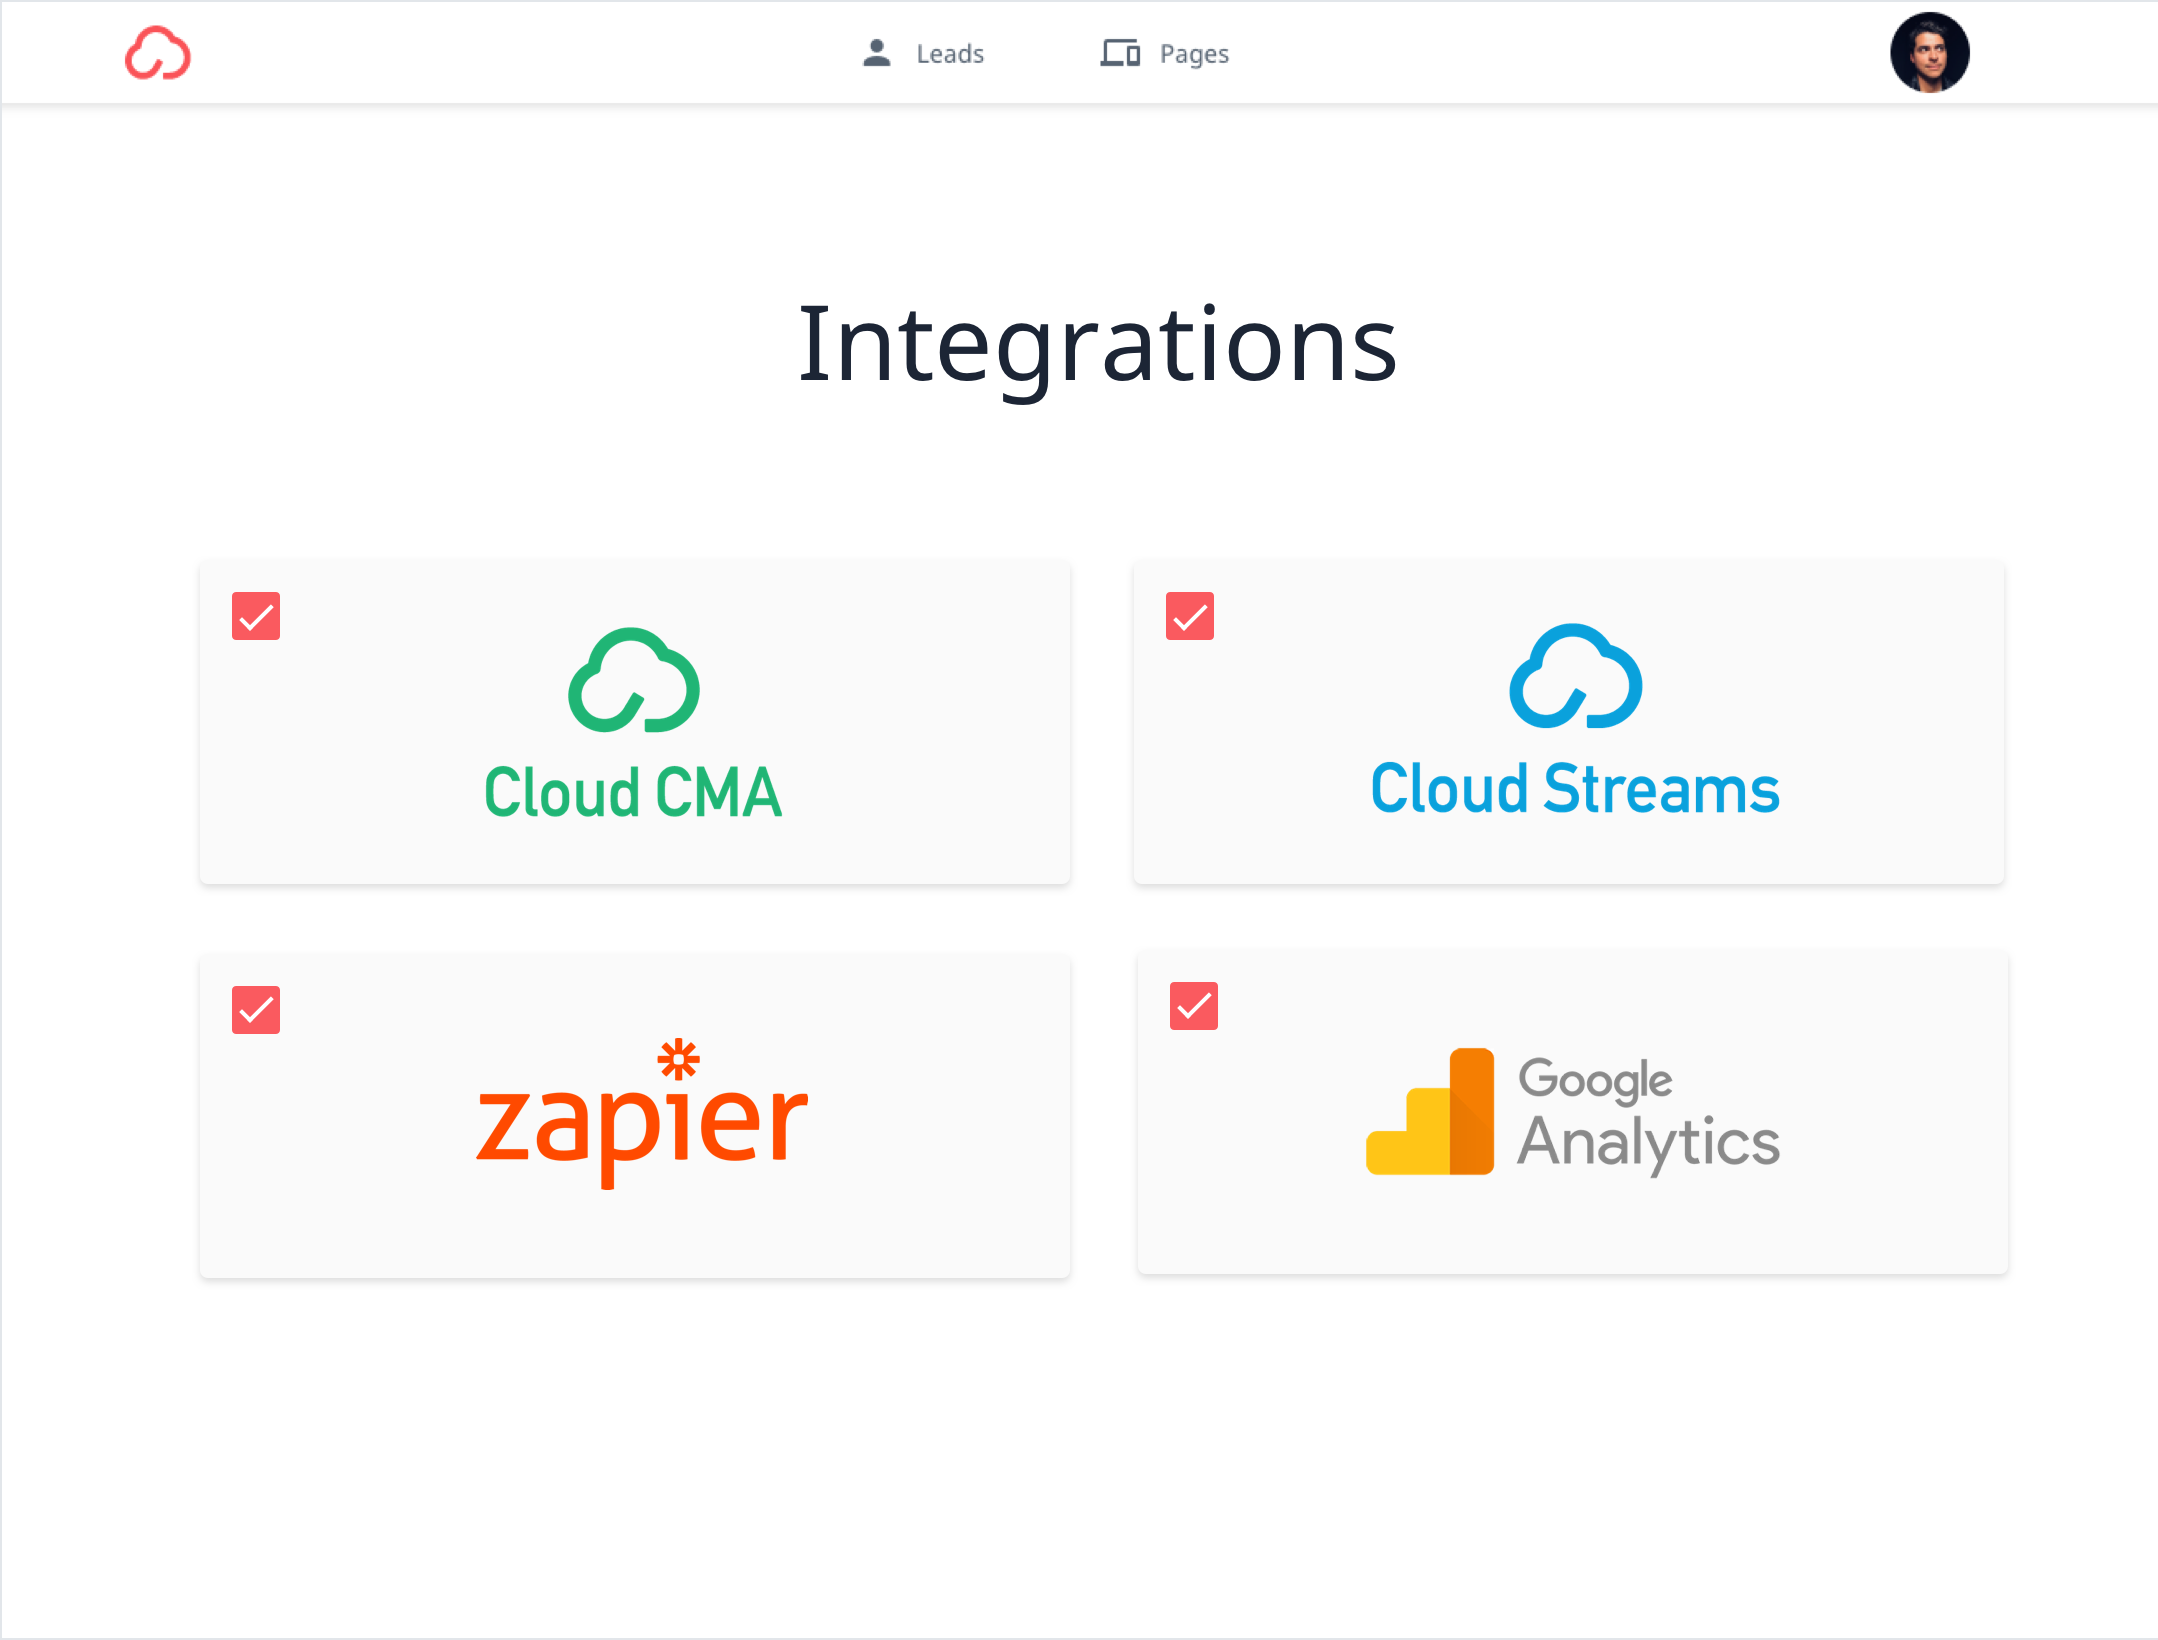 A grid of cards with red checkmarks in their top-left corner are displayed, each featuring a single integration option from among Cloud CMA, Cloud Streams, Google Analytics, and WordPress.